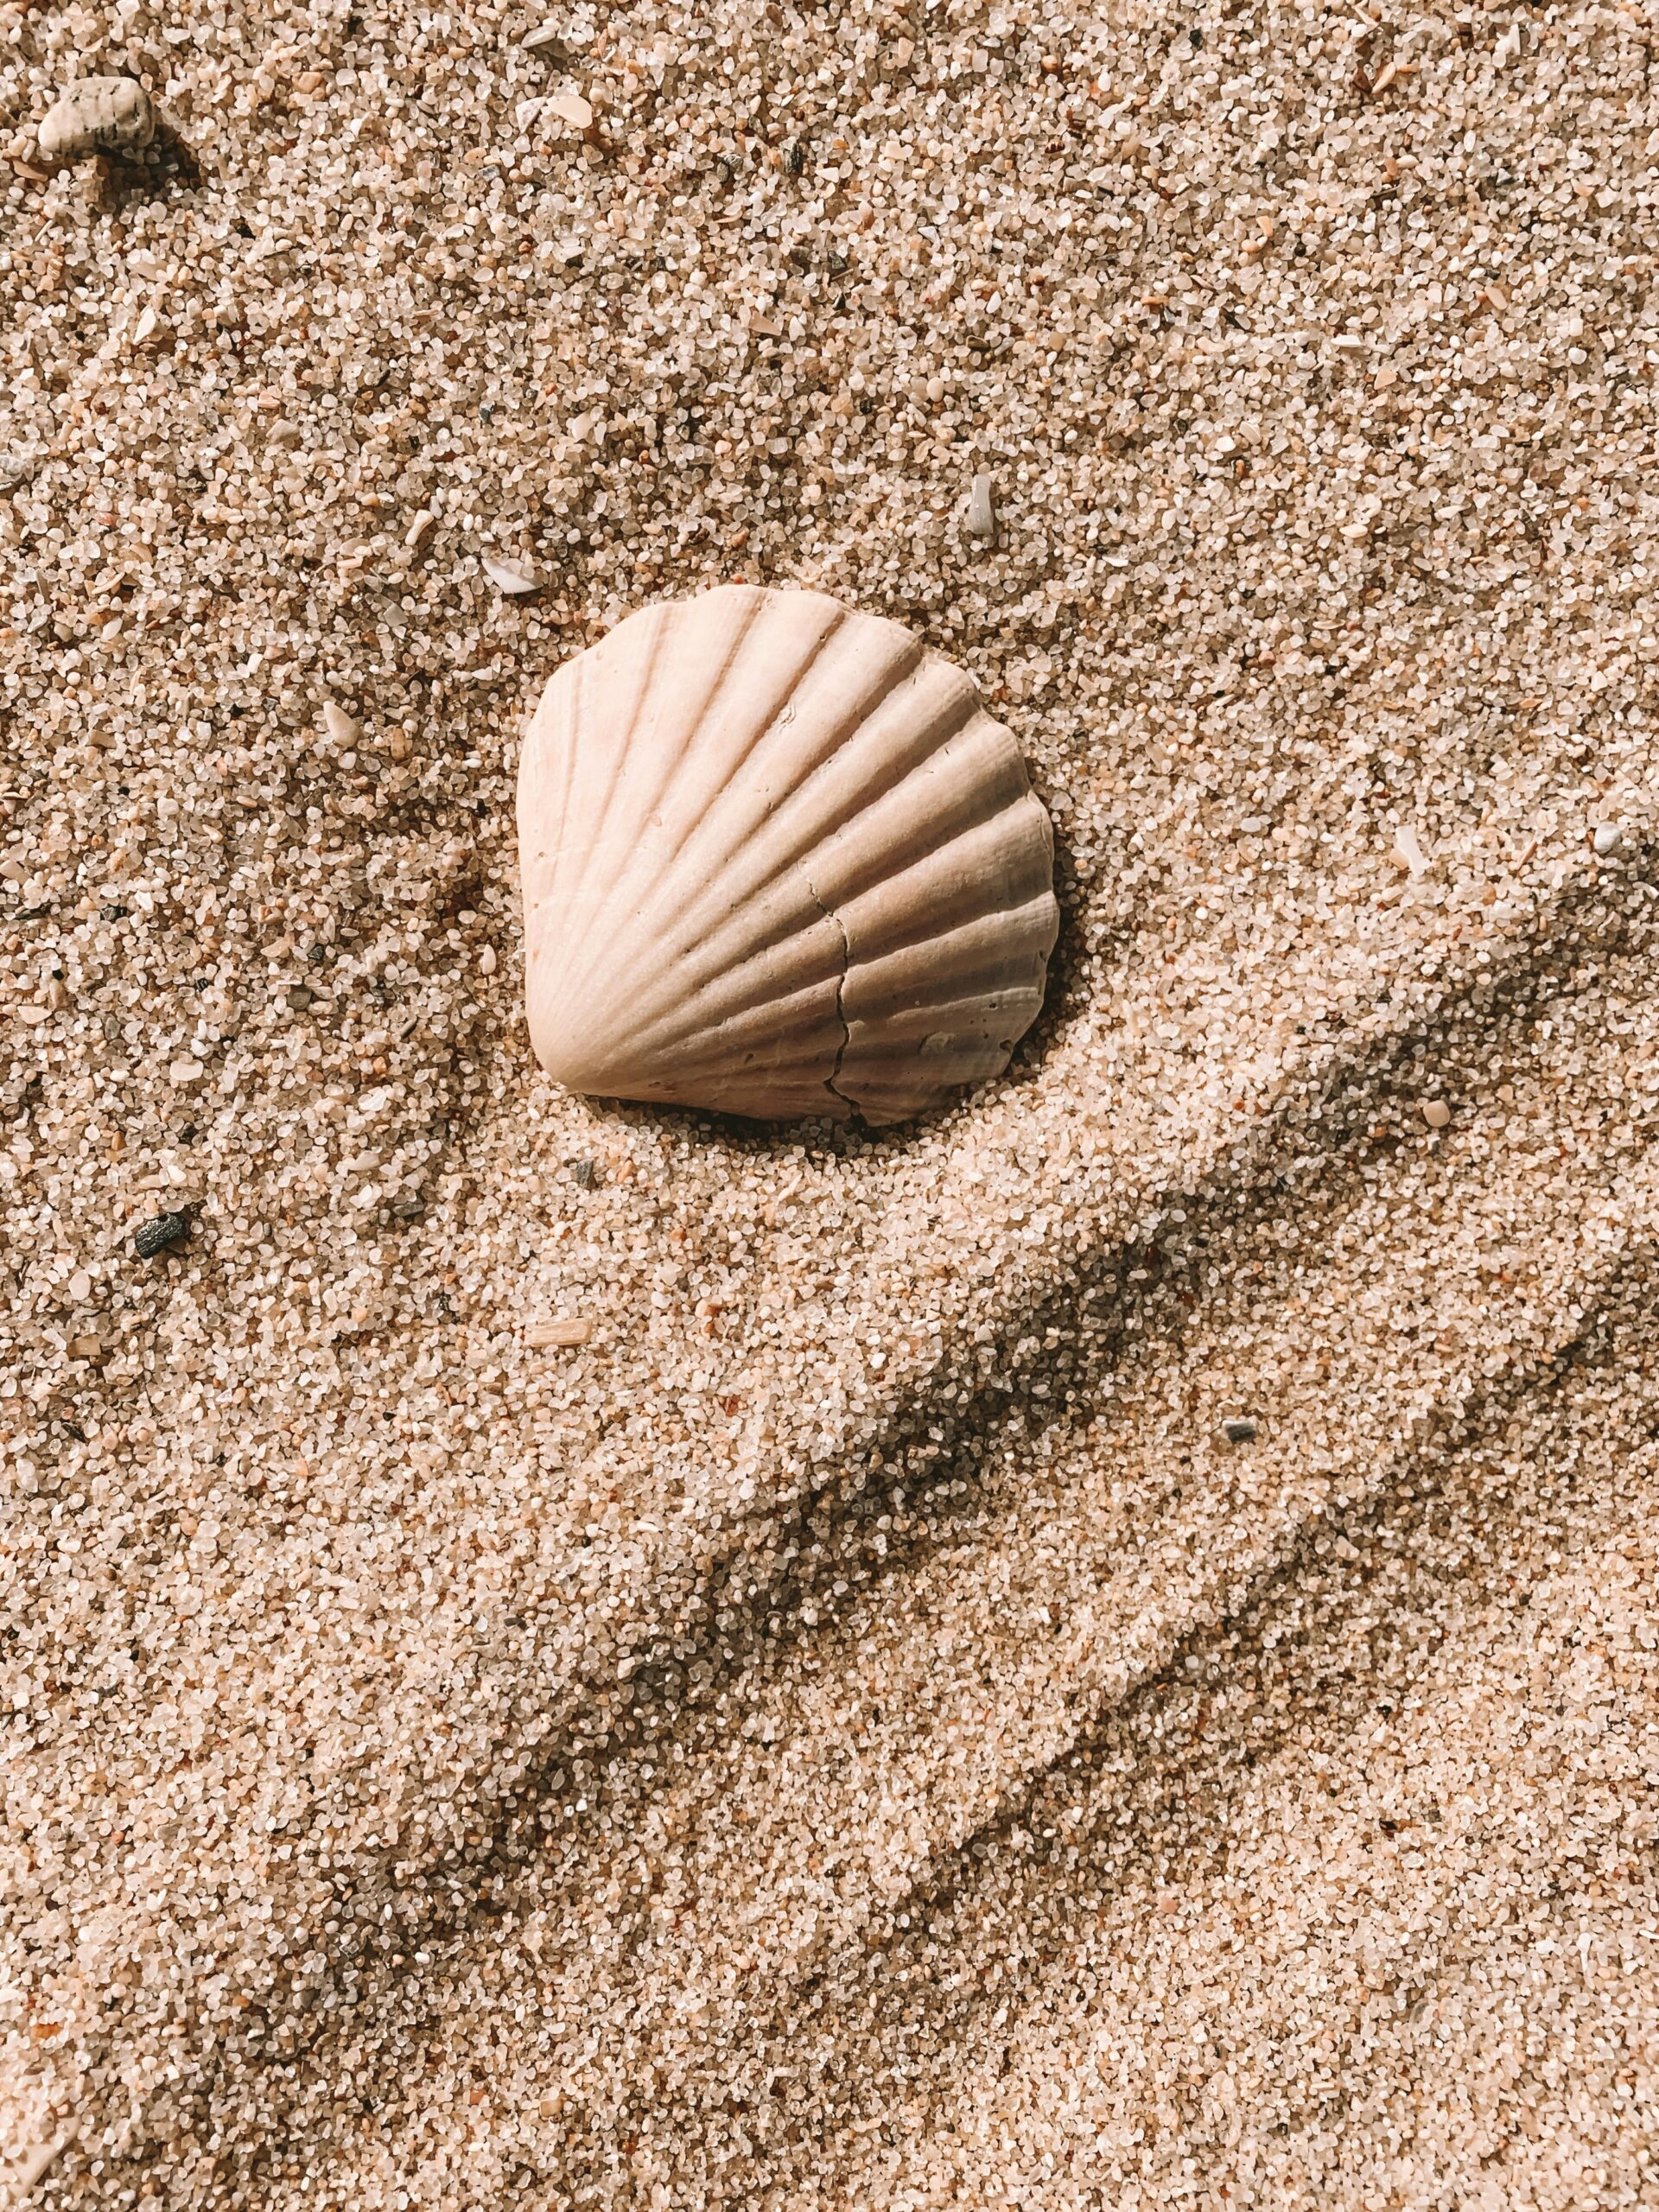 What Are The Best Beaches In Nicaragua For Seashell Collectors?